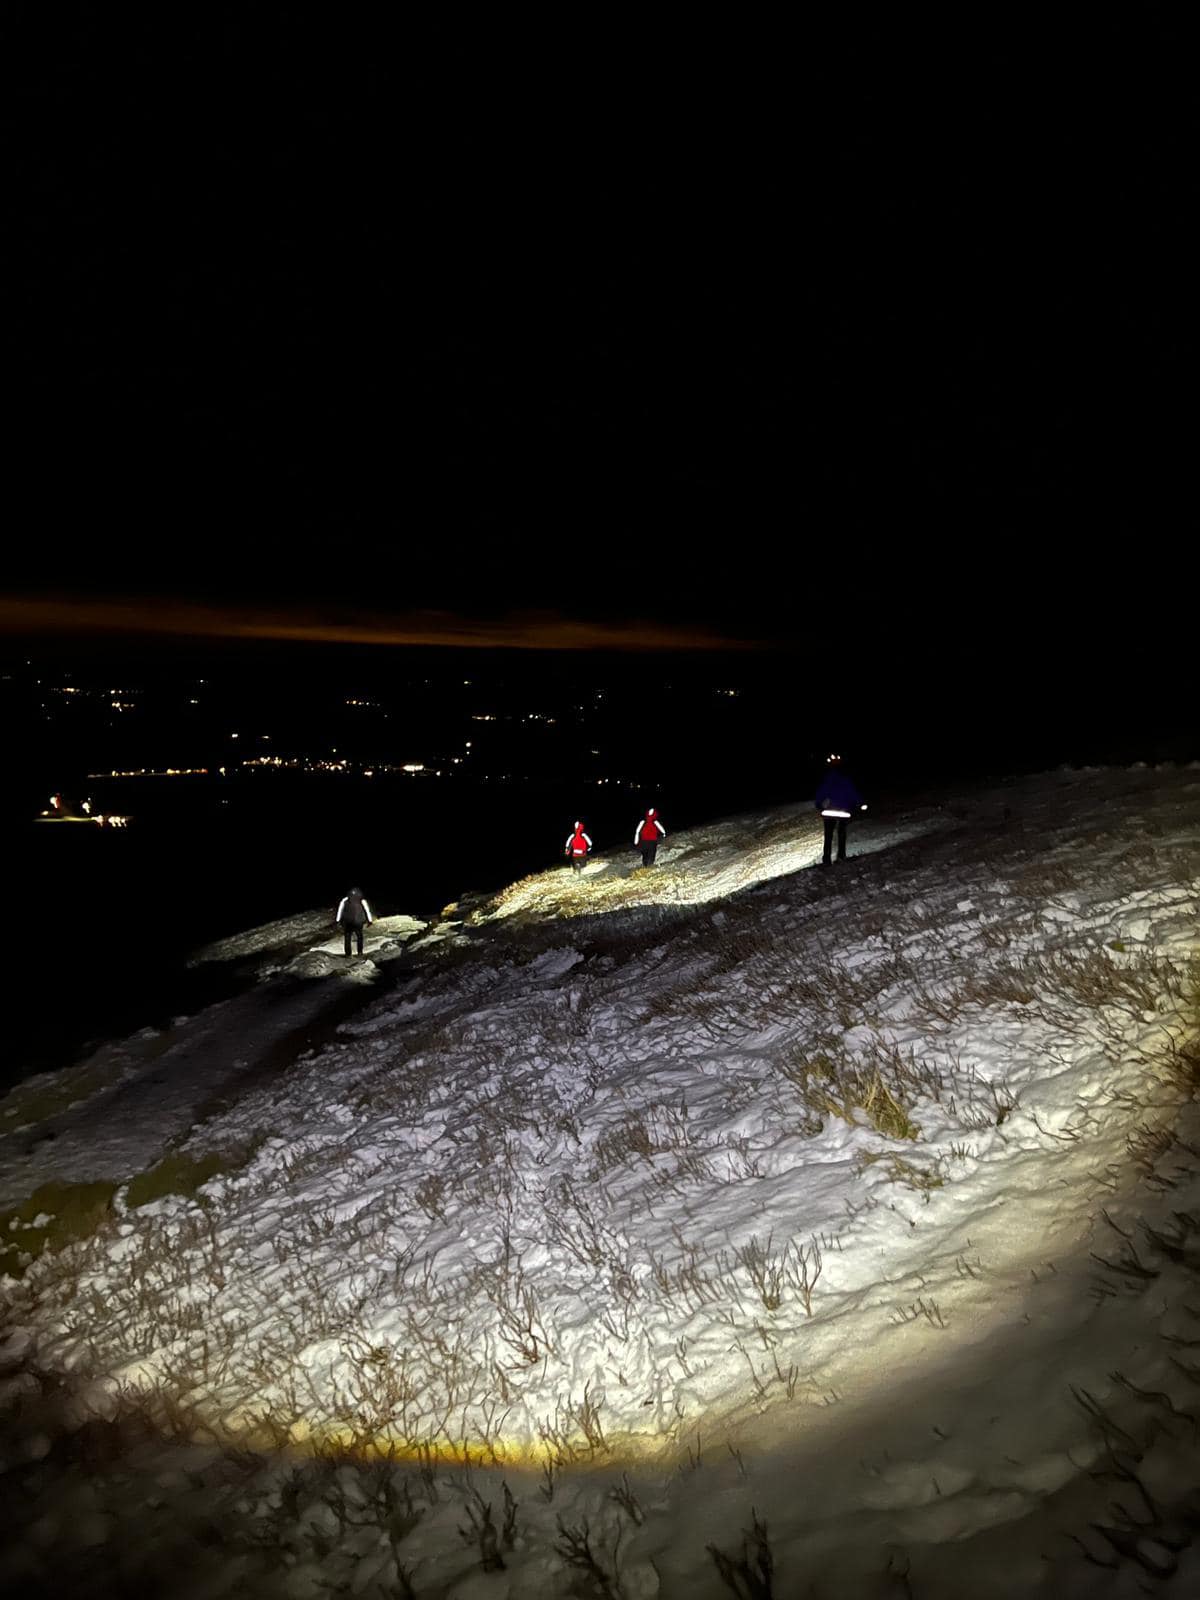 Moffat Mountain Rescue faced challenging wintry conditions on Tinto Hill.